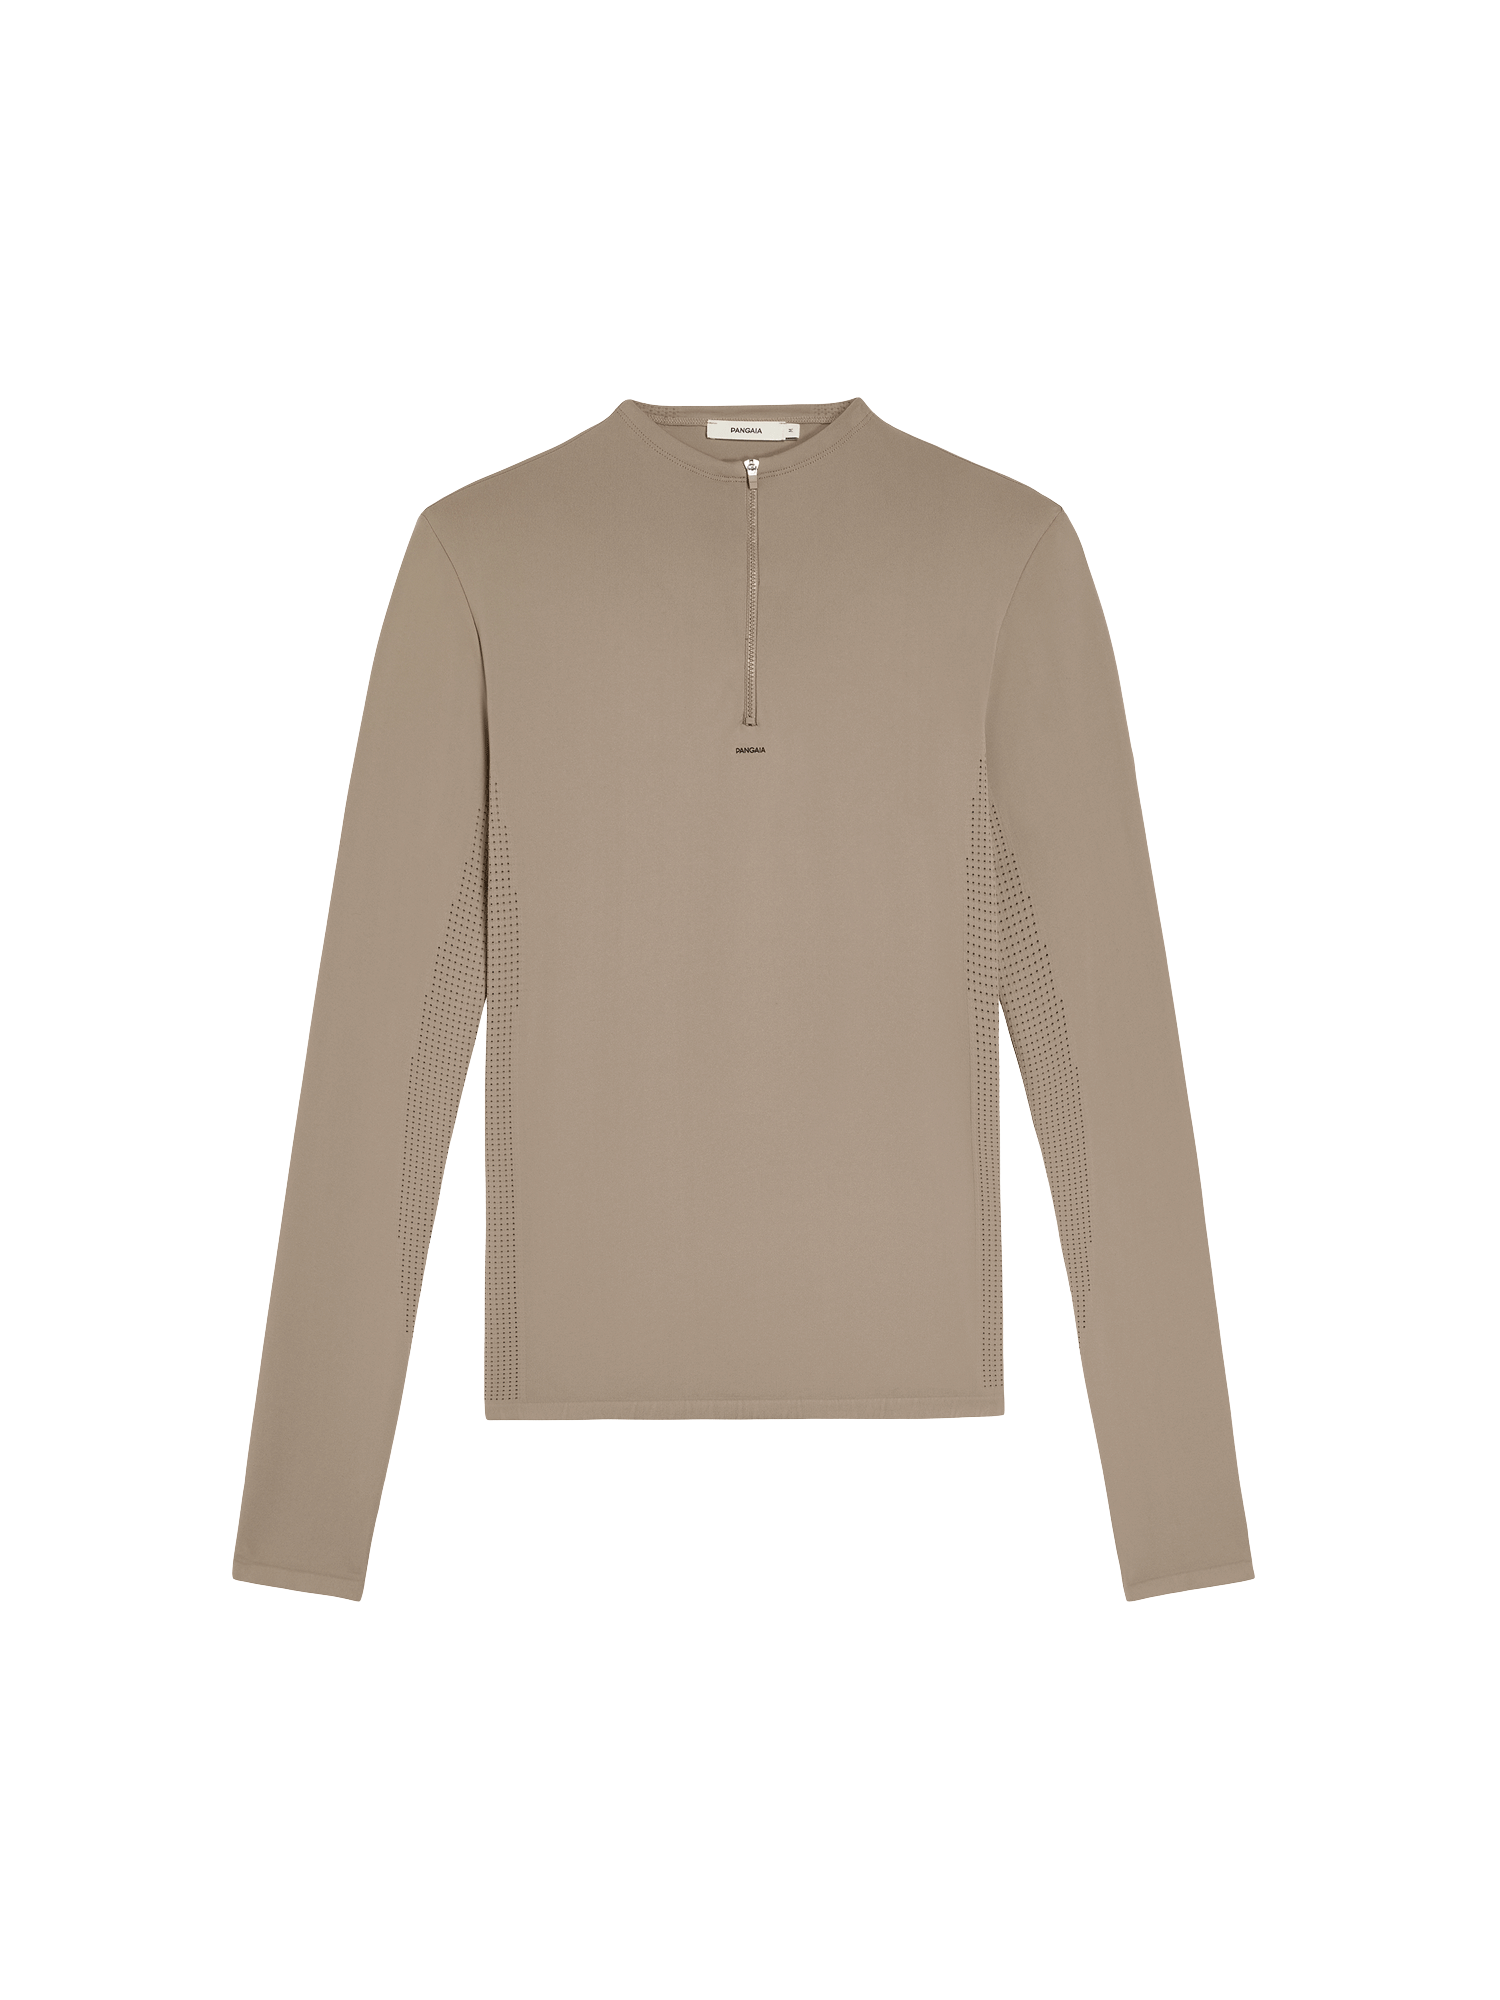 https://storage.googleapis.com/download/storage/v1/b/whering.appspot.com/o/marketplace_product_images%2Fpangaia-mens-motion-x-zipped-longsleeved-toptaupe-beige-6a5VwuUp2SN2FgYkjUri4C.png?generation=1687669220689265&alt=media